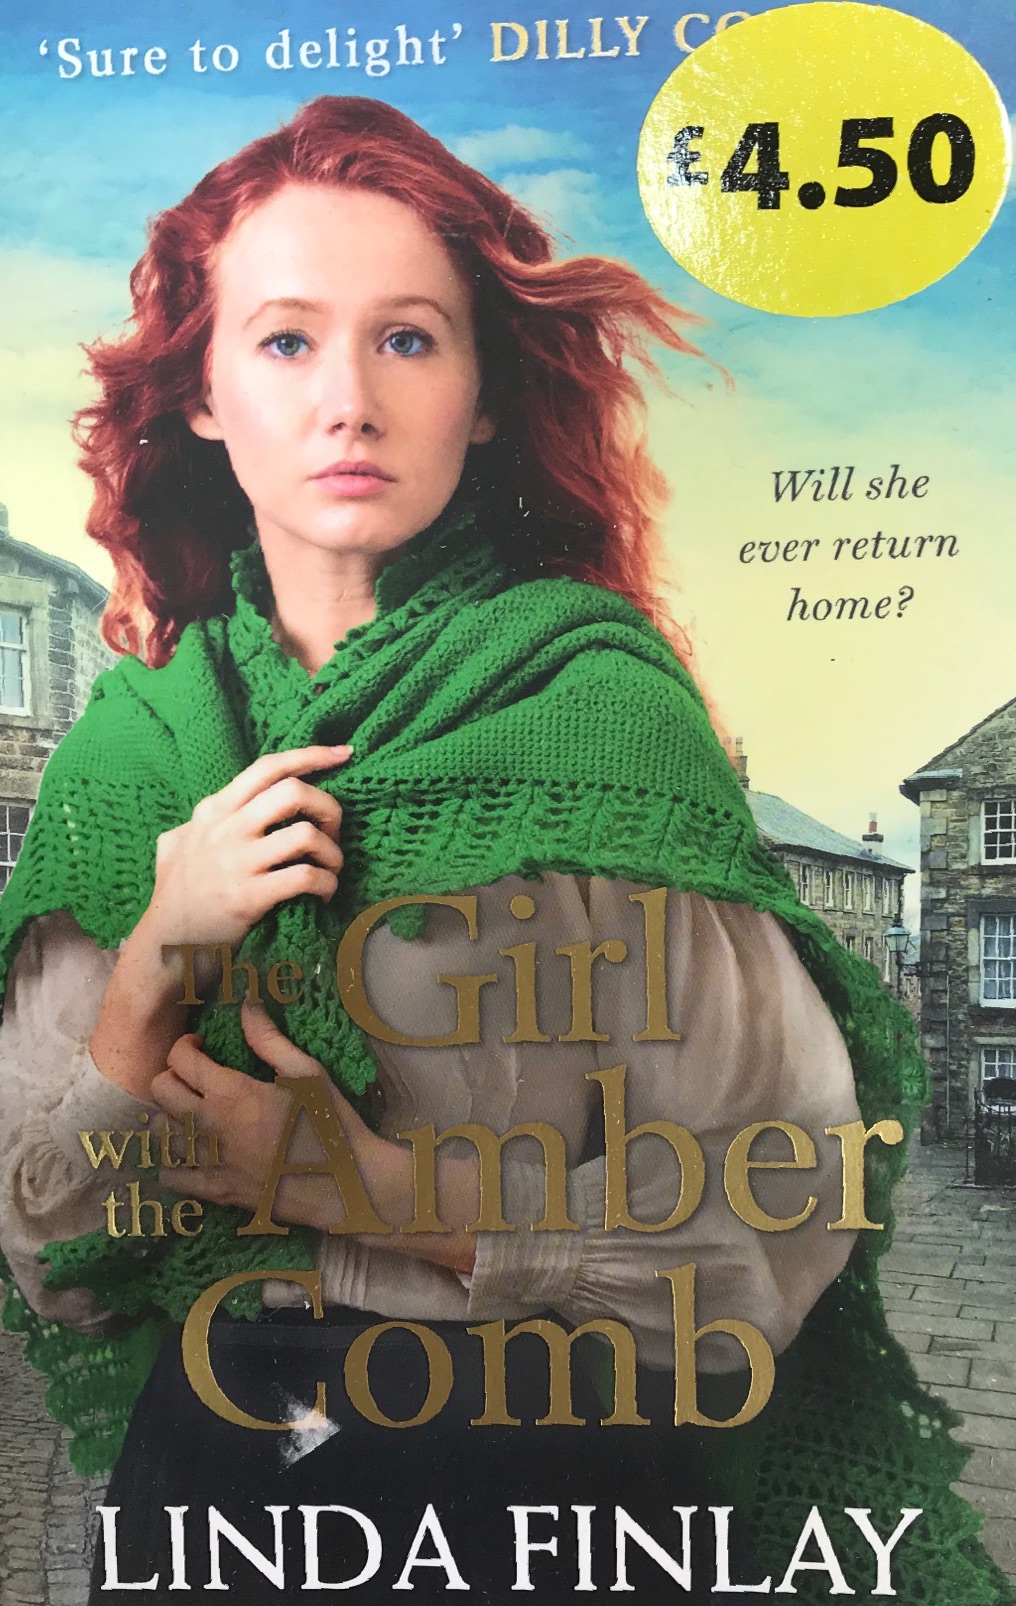 The Girl With The Amber Comb - Linda Finlay